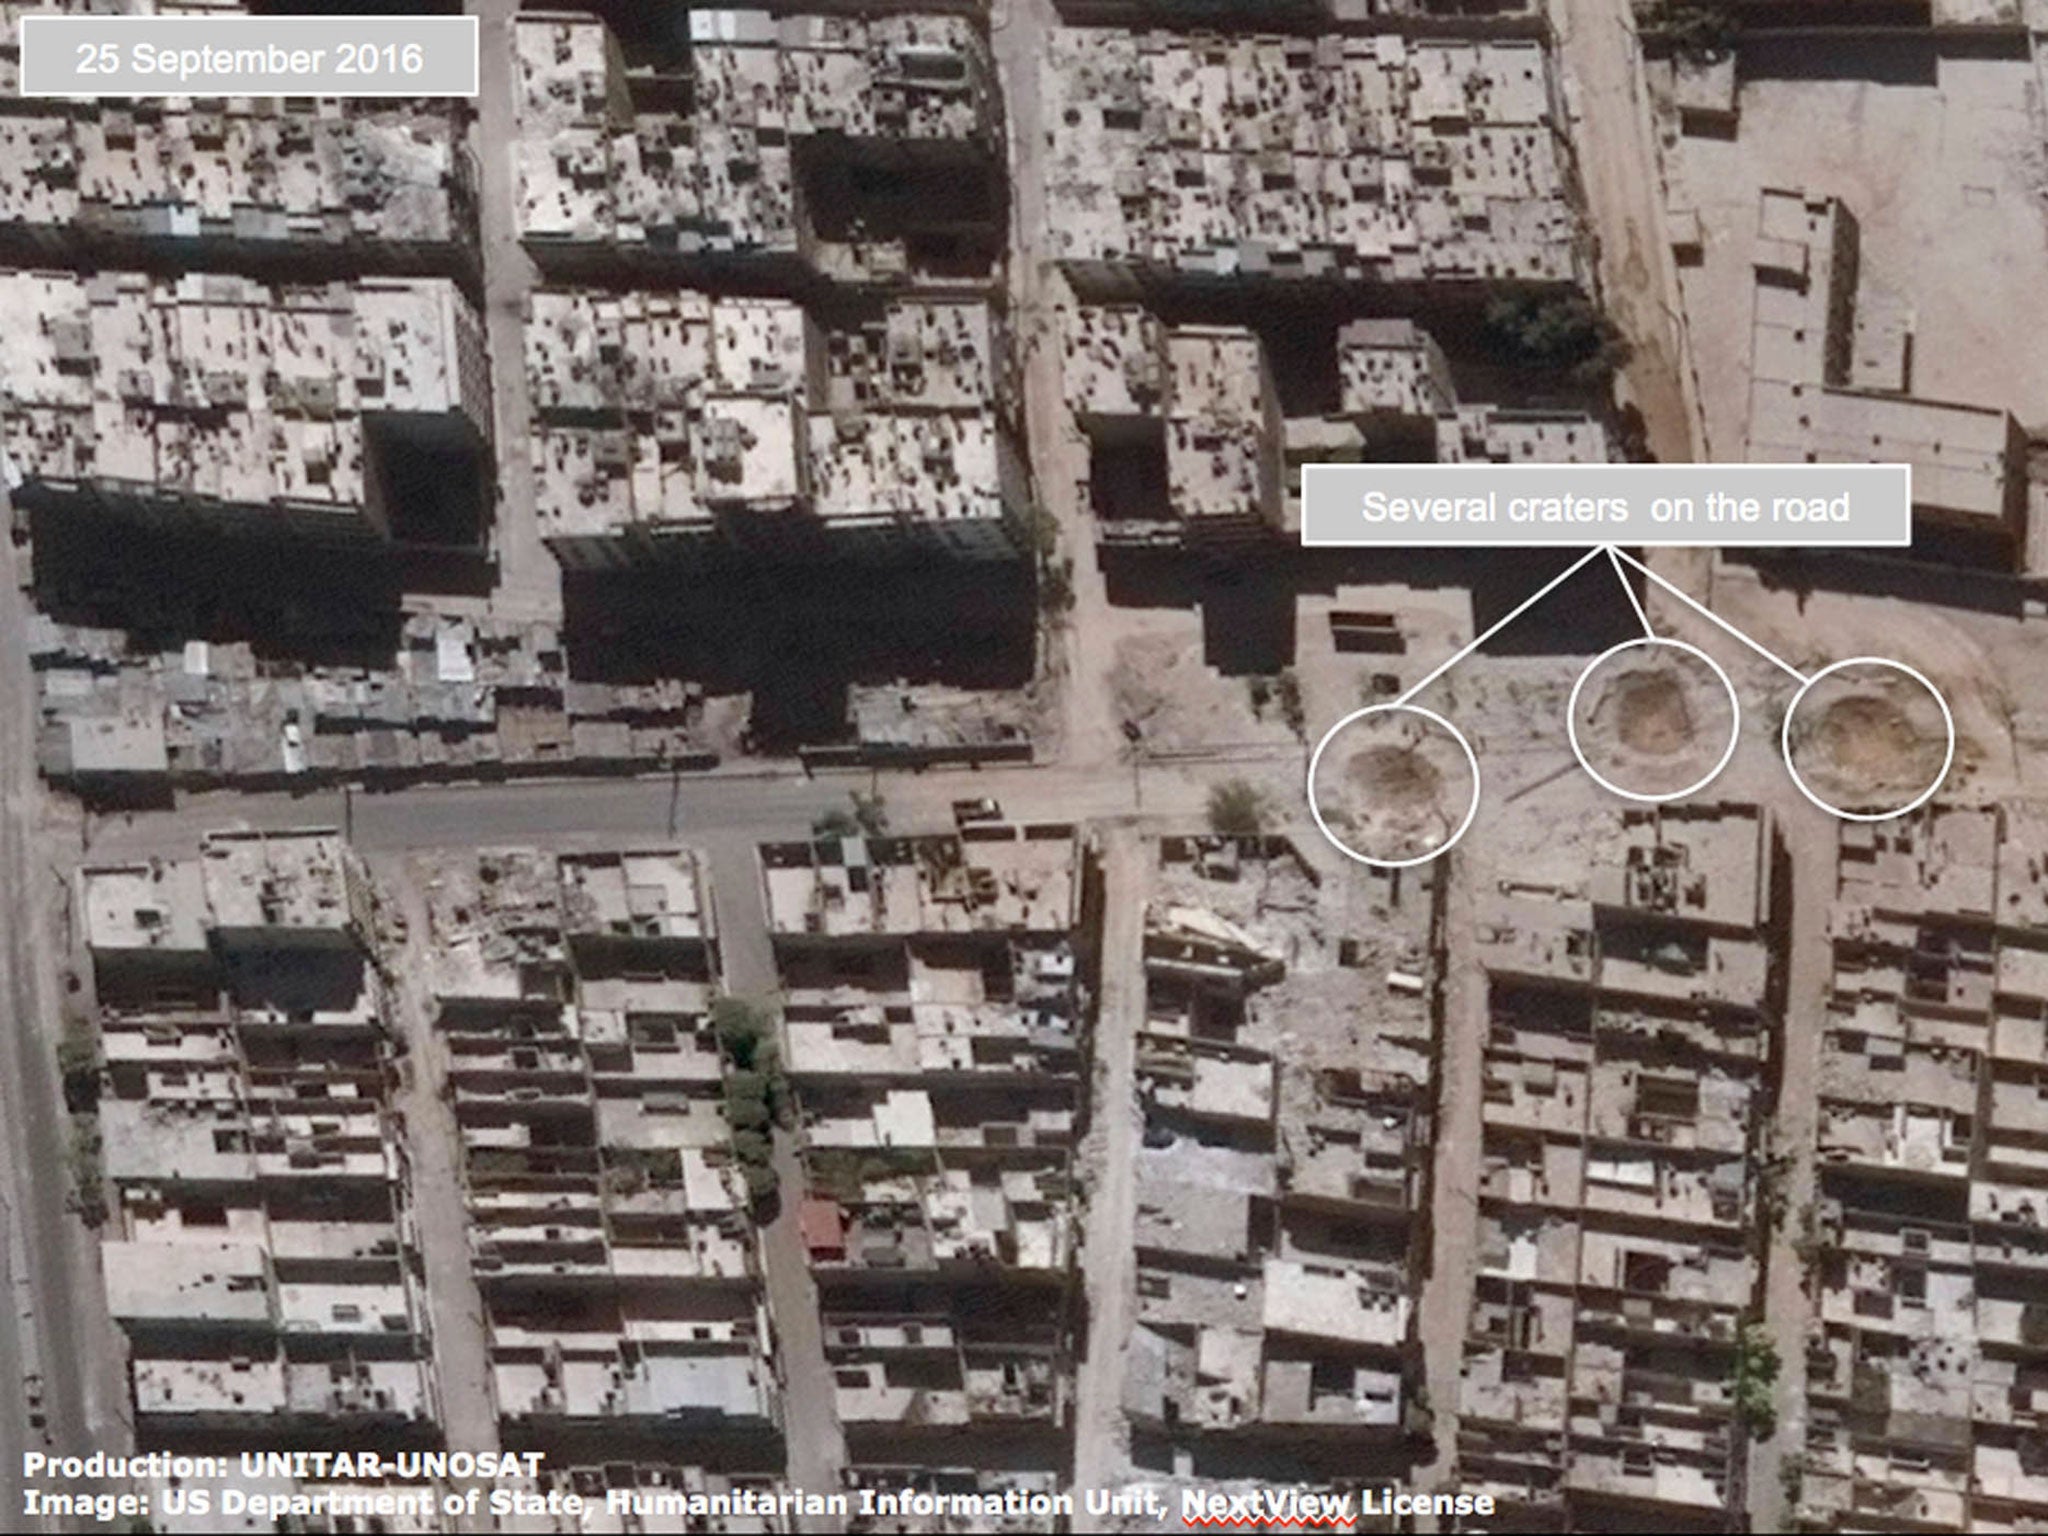 This satellite image released by the United Nations shows road damage and craters in the Sha'ar district of Aleppo, Syria, on 25 September 2016